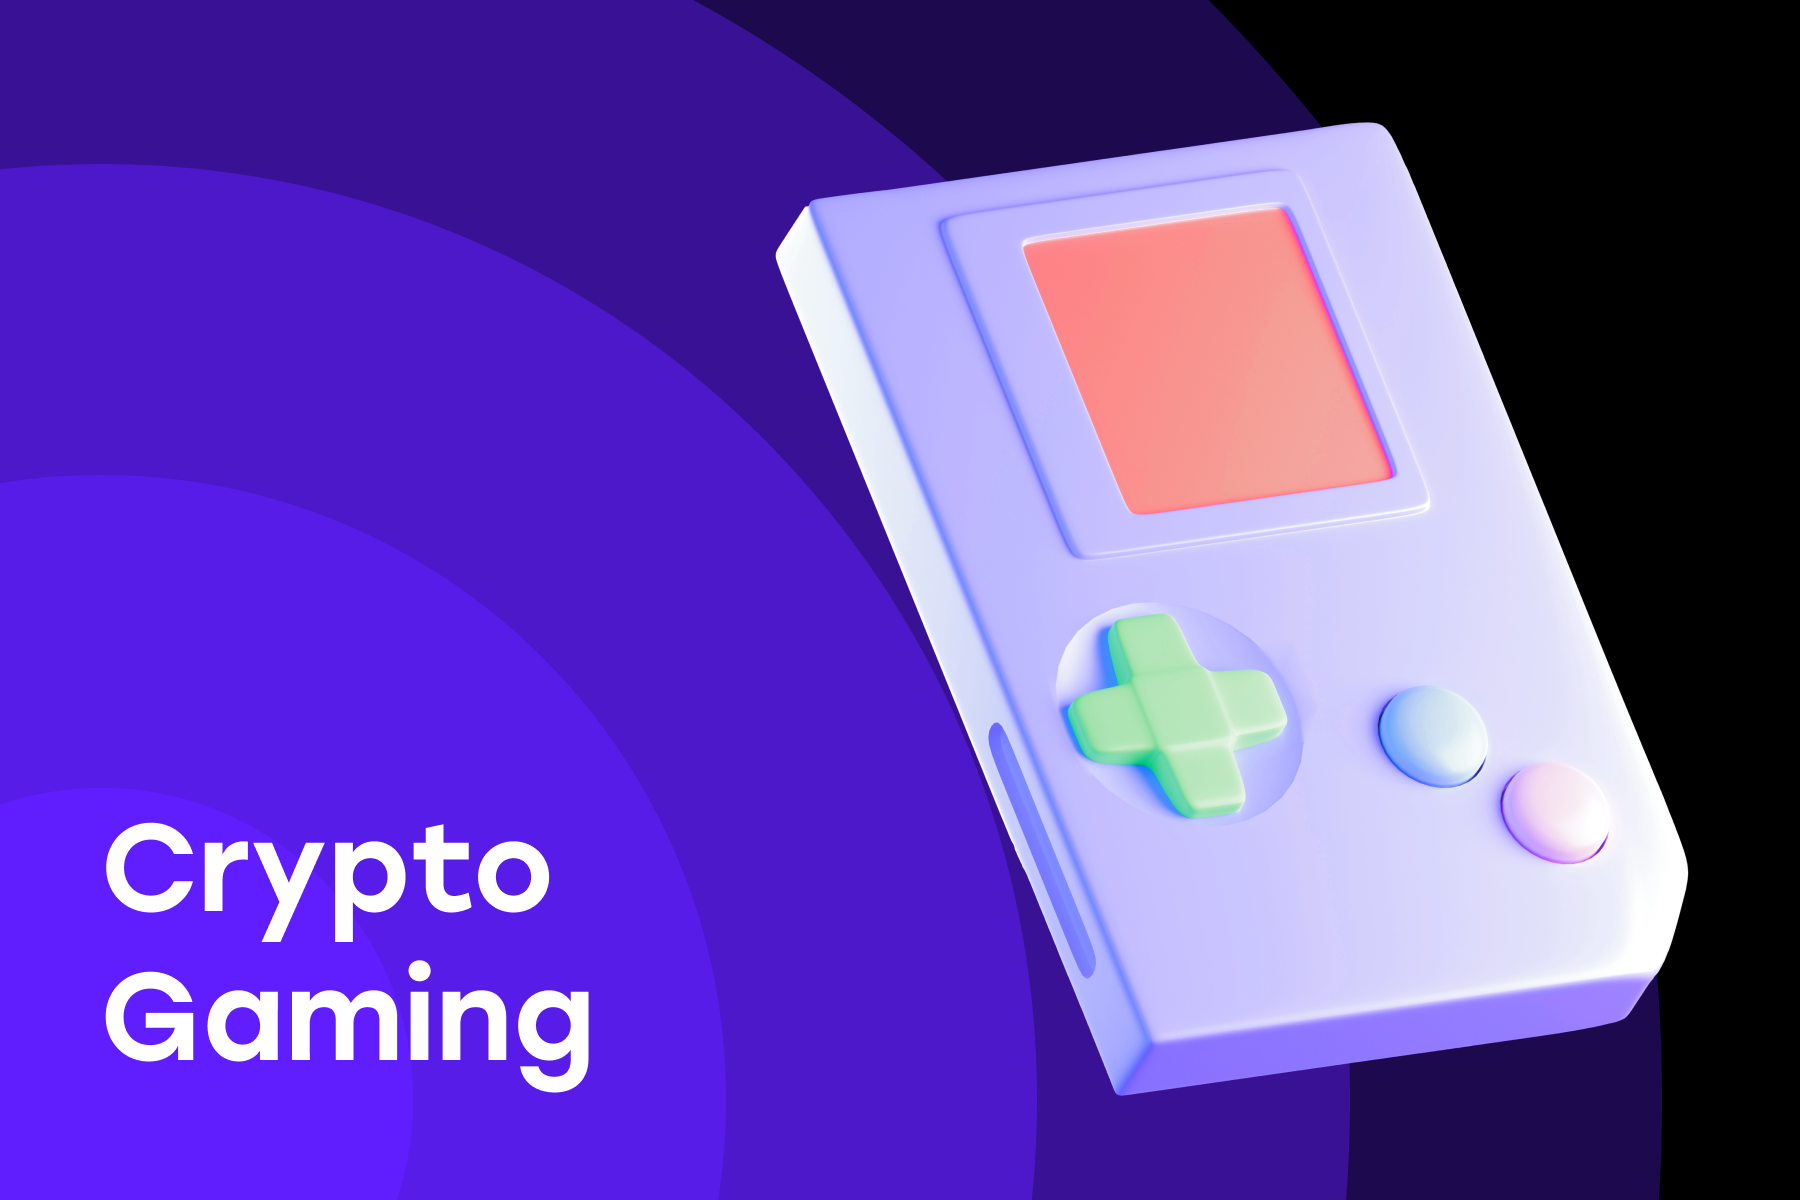 Crypto Gaming Explained: Why Play Crypto Games?